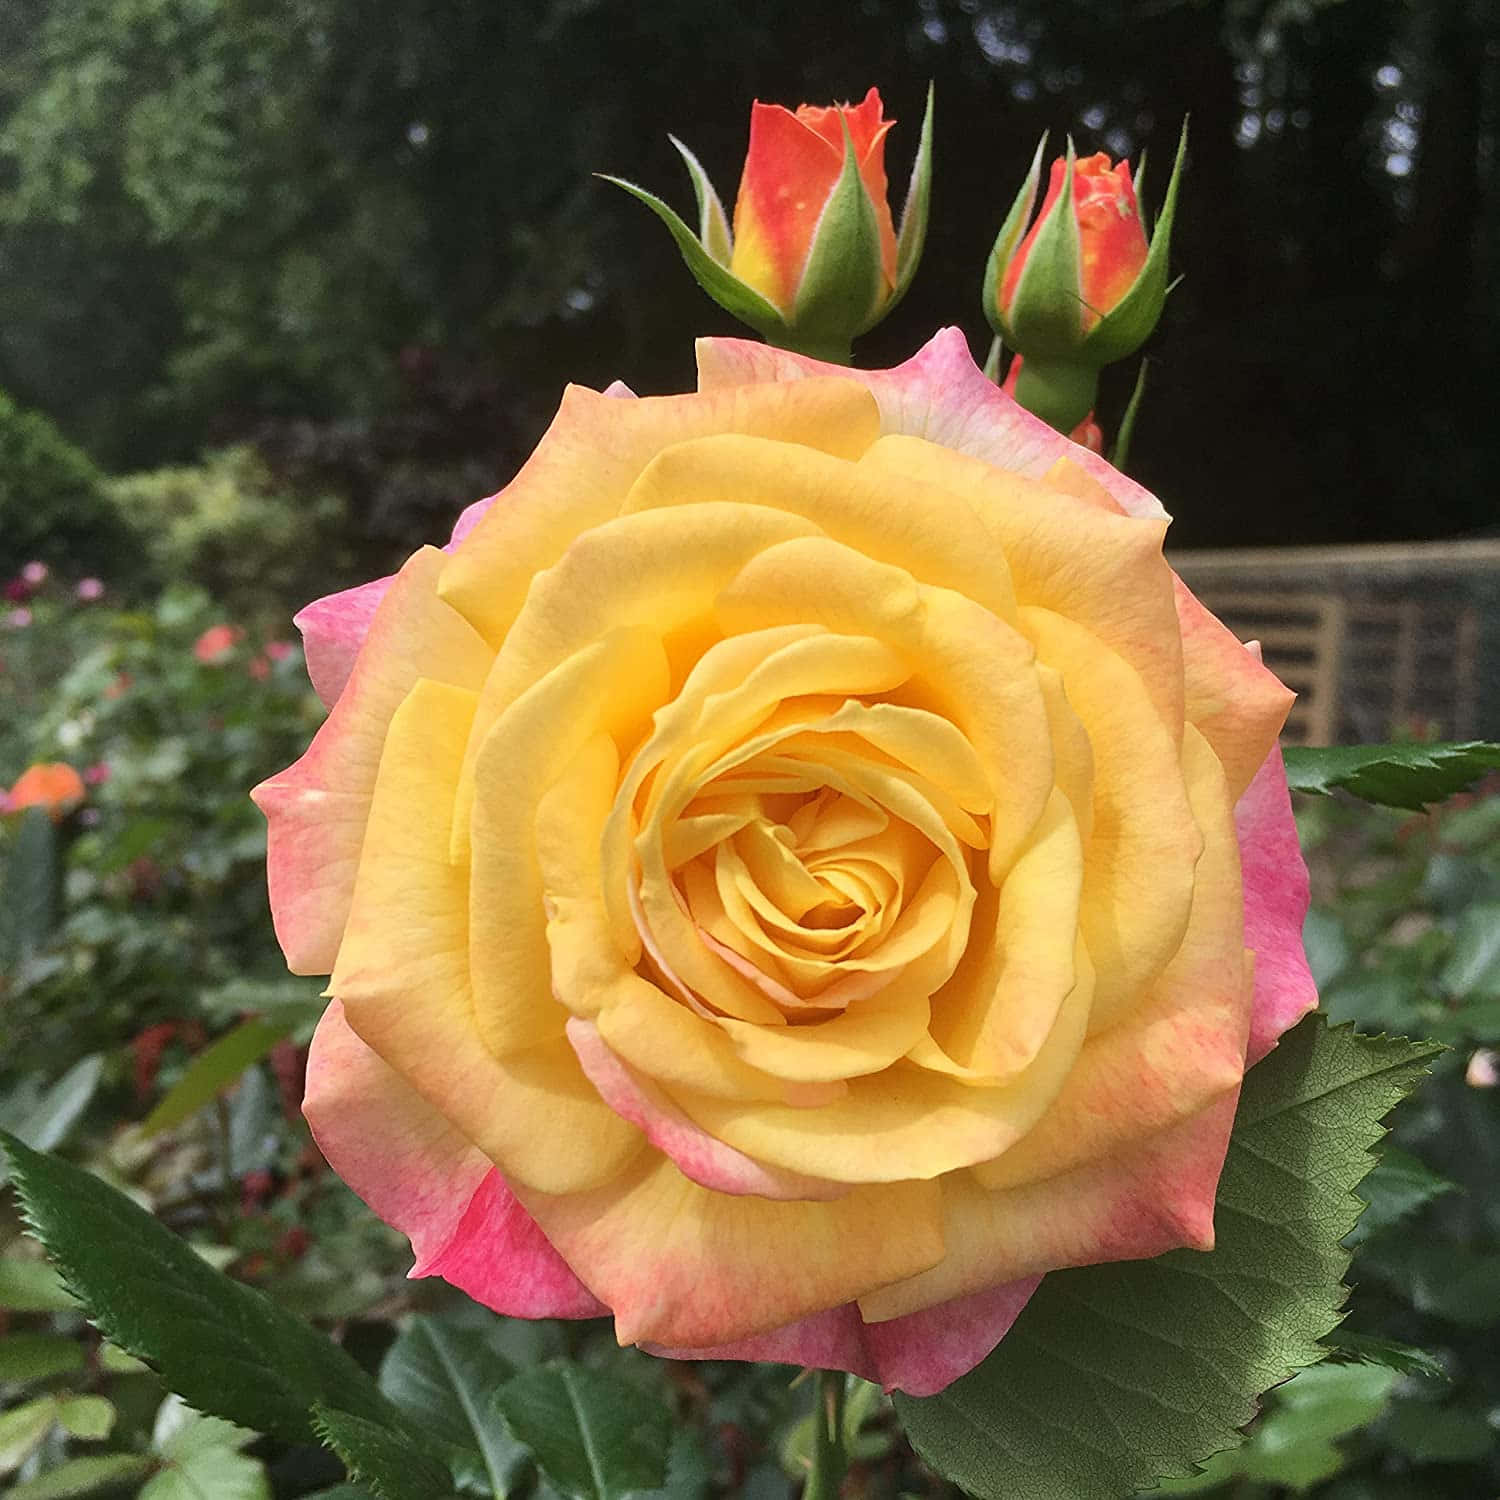 A fresh and fragrant rose flower blooms.